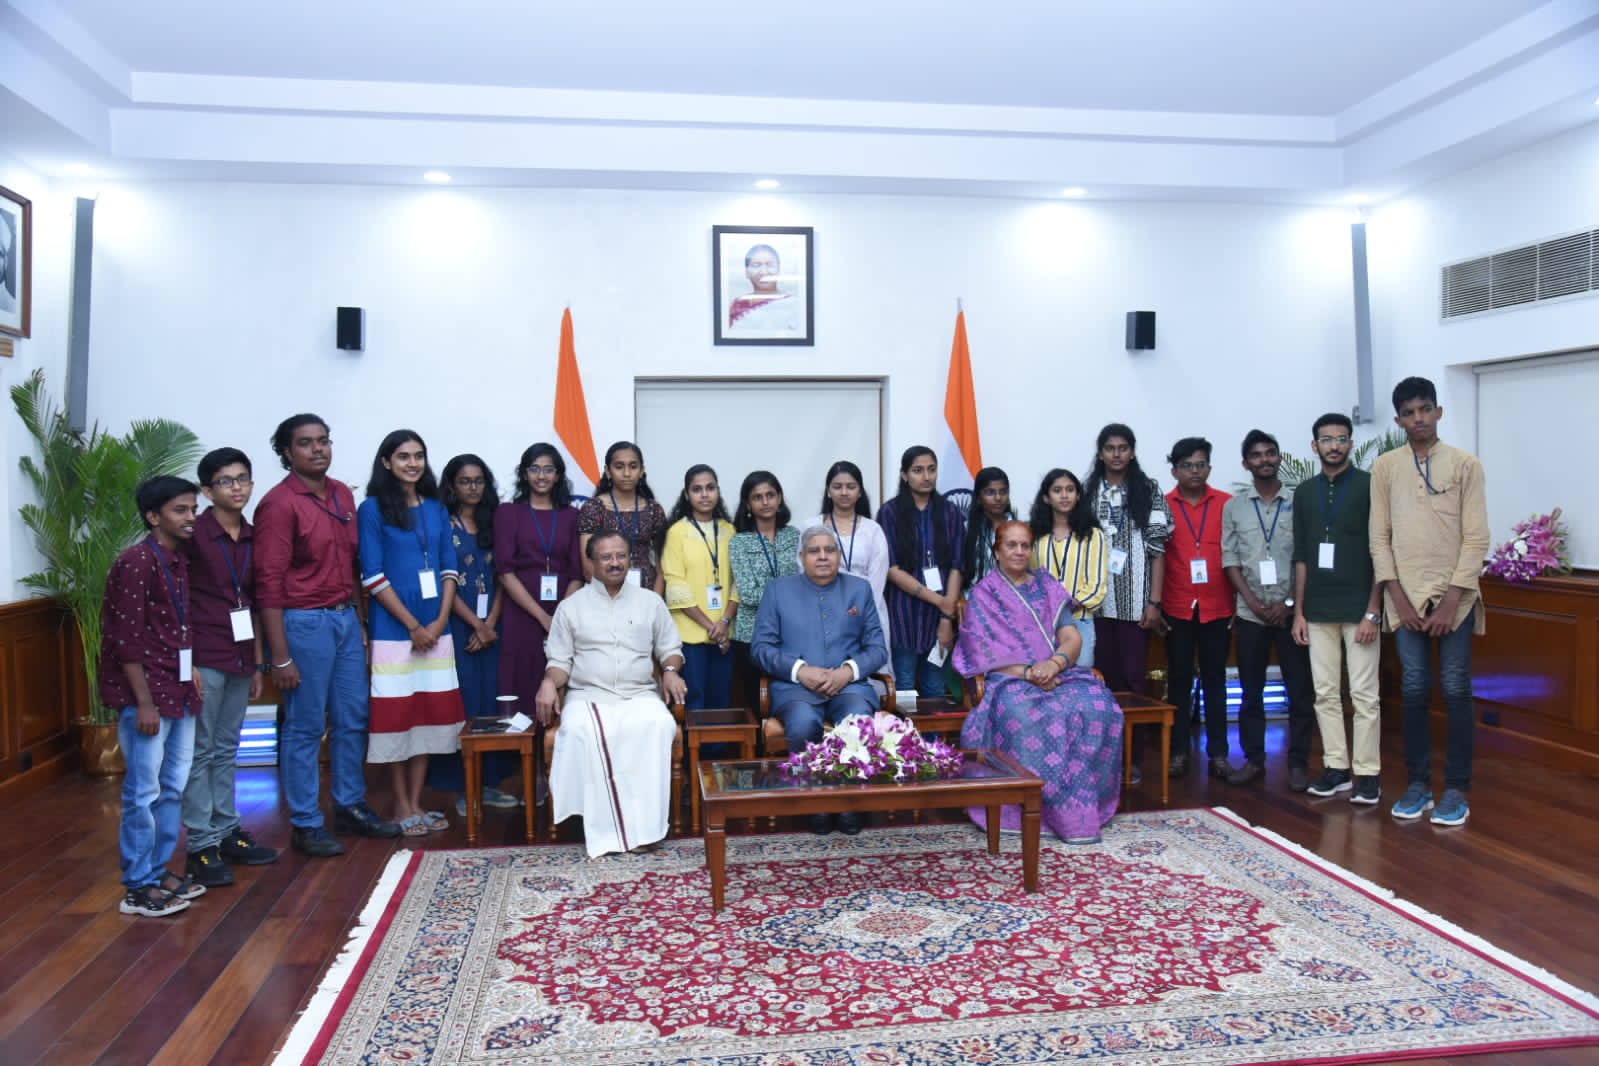 The Vice President, Shri Jagdeep Dhankhar, in a group photograph with the Winners of 'Mann ki Baat' Quiz Competition from Kerala in New Delhi on August 12, 2023. The Union Minister of State for External Affairs and Parliamentary Affairs,  Shri V. Muraleedharan is also seen